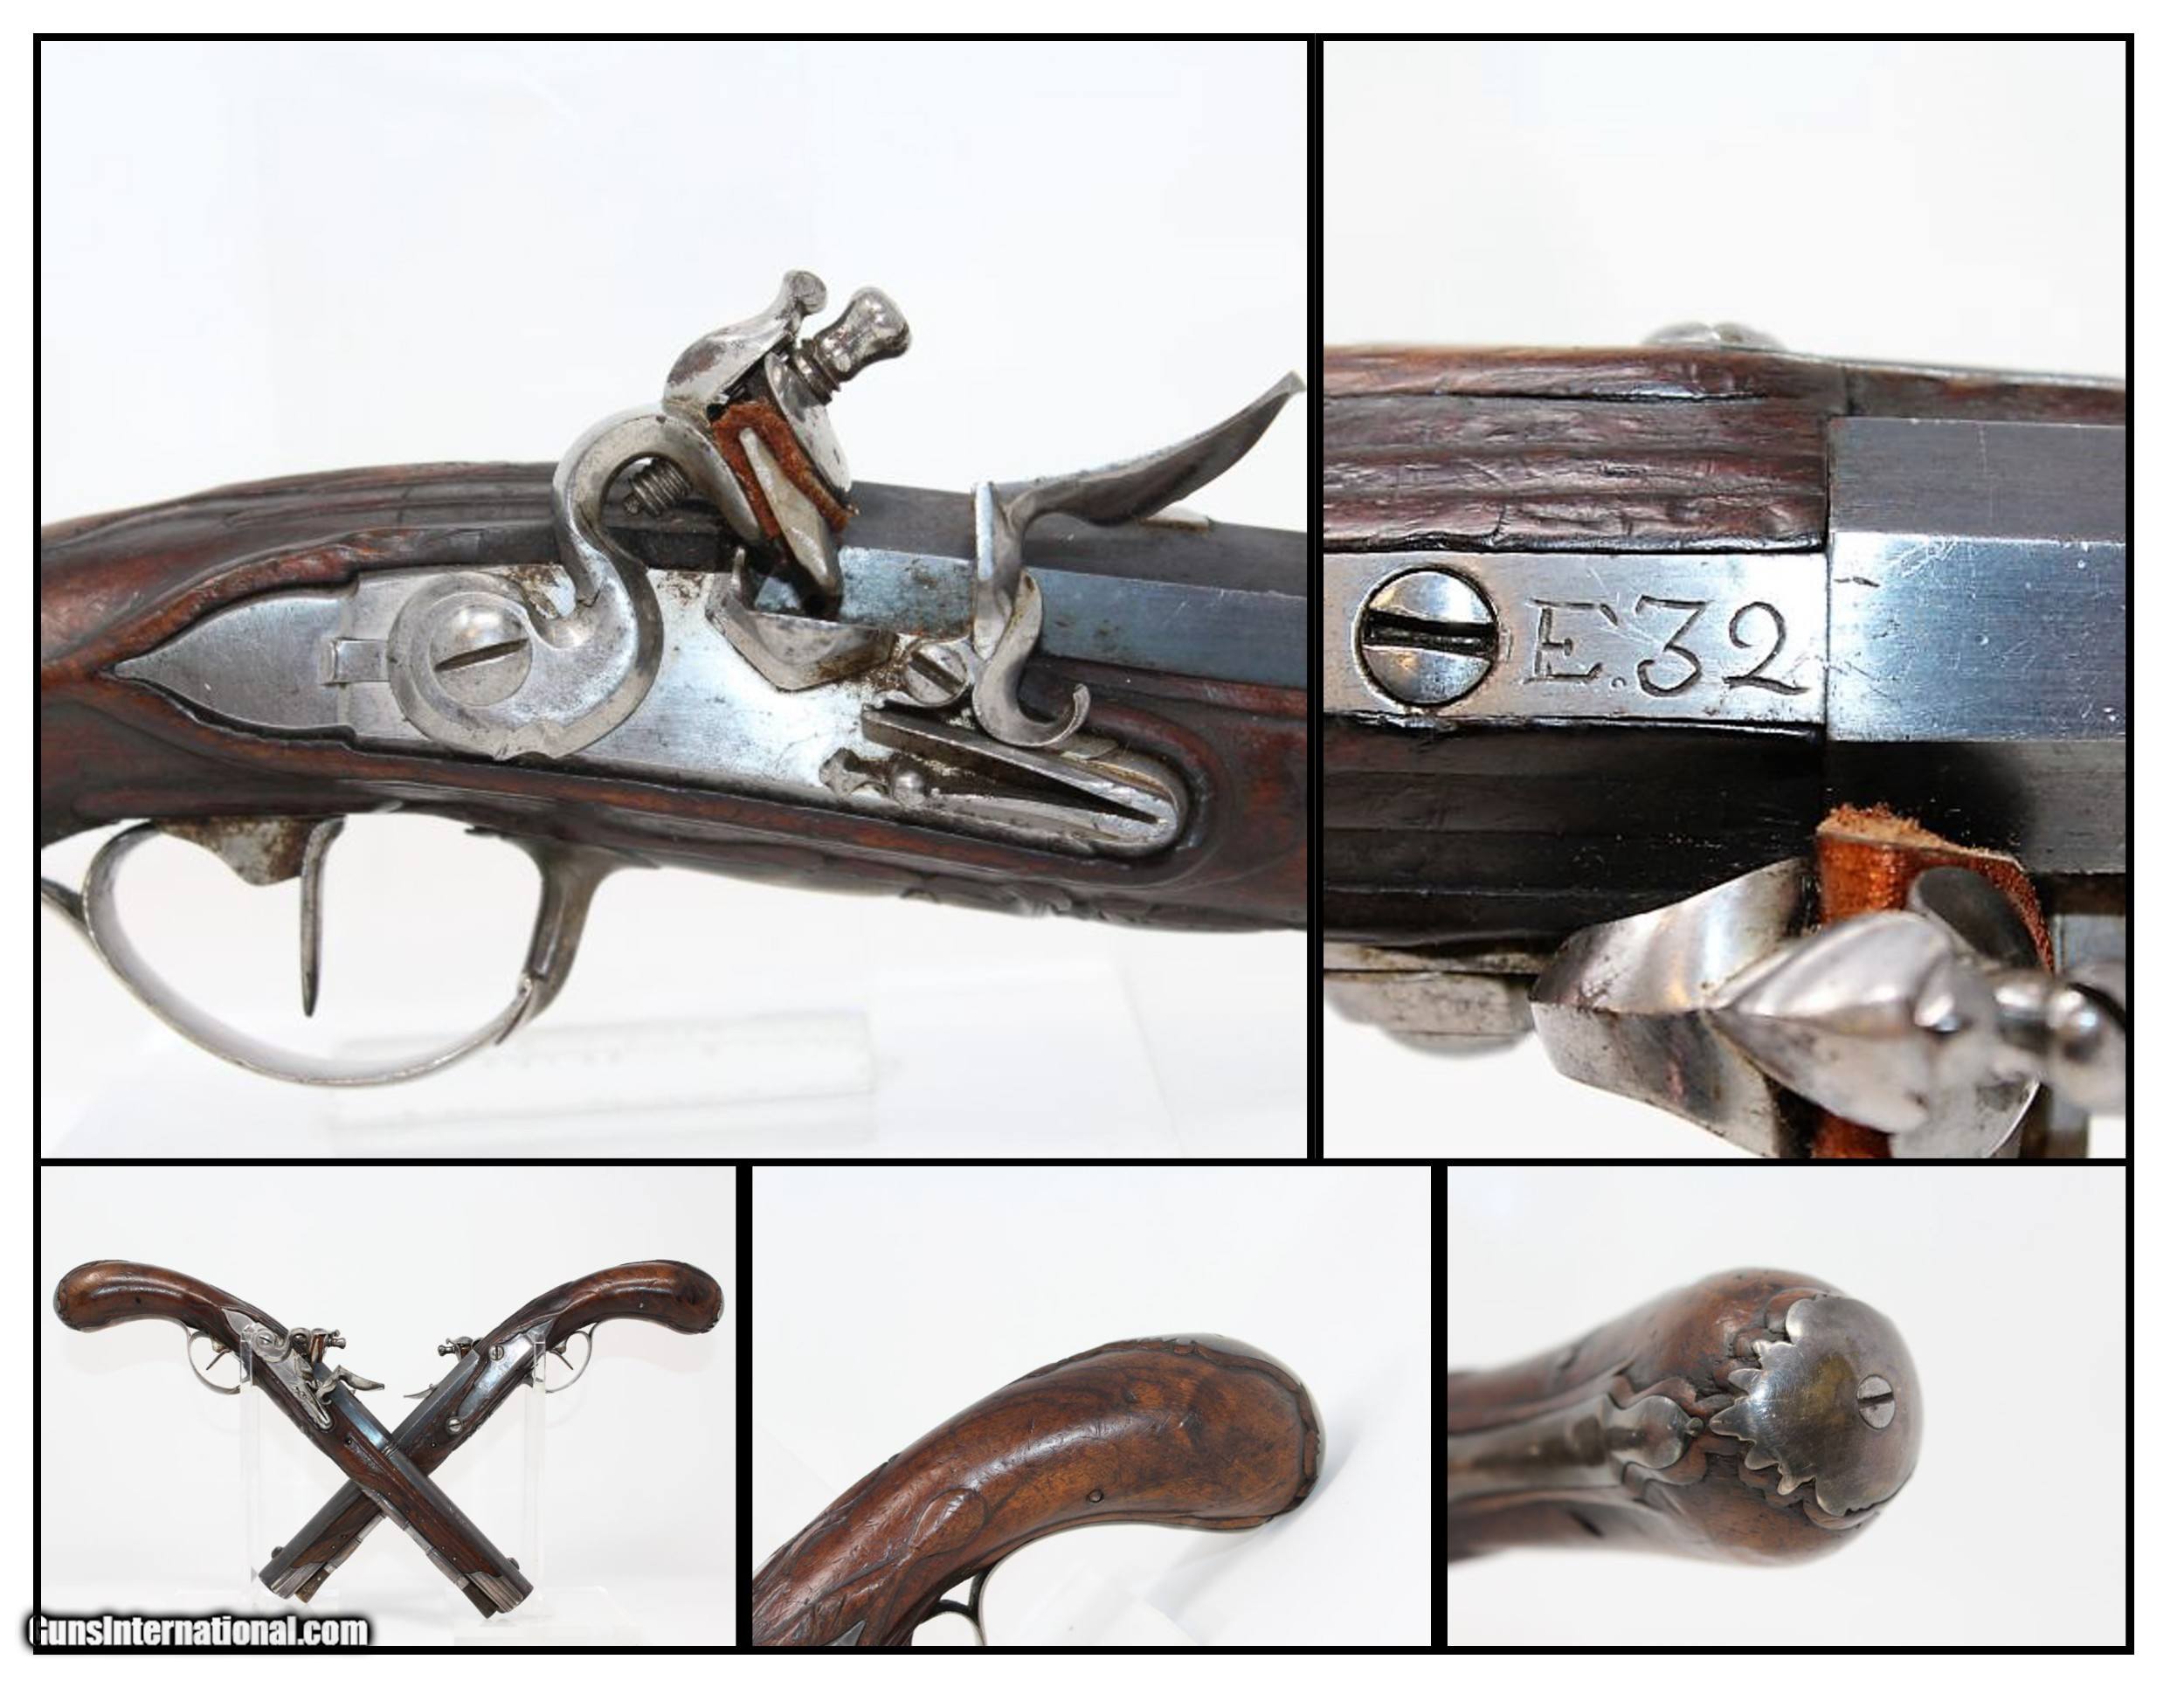 Pair of Flintlock Dueling Pistols with Case and Accessories, c